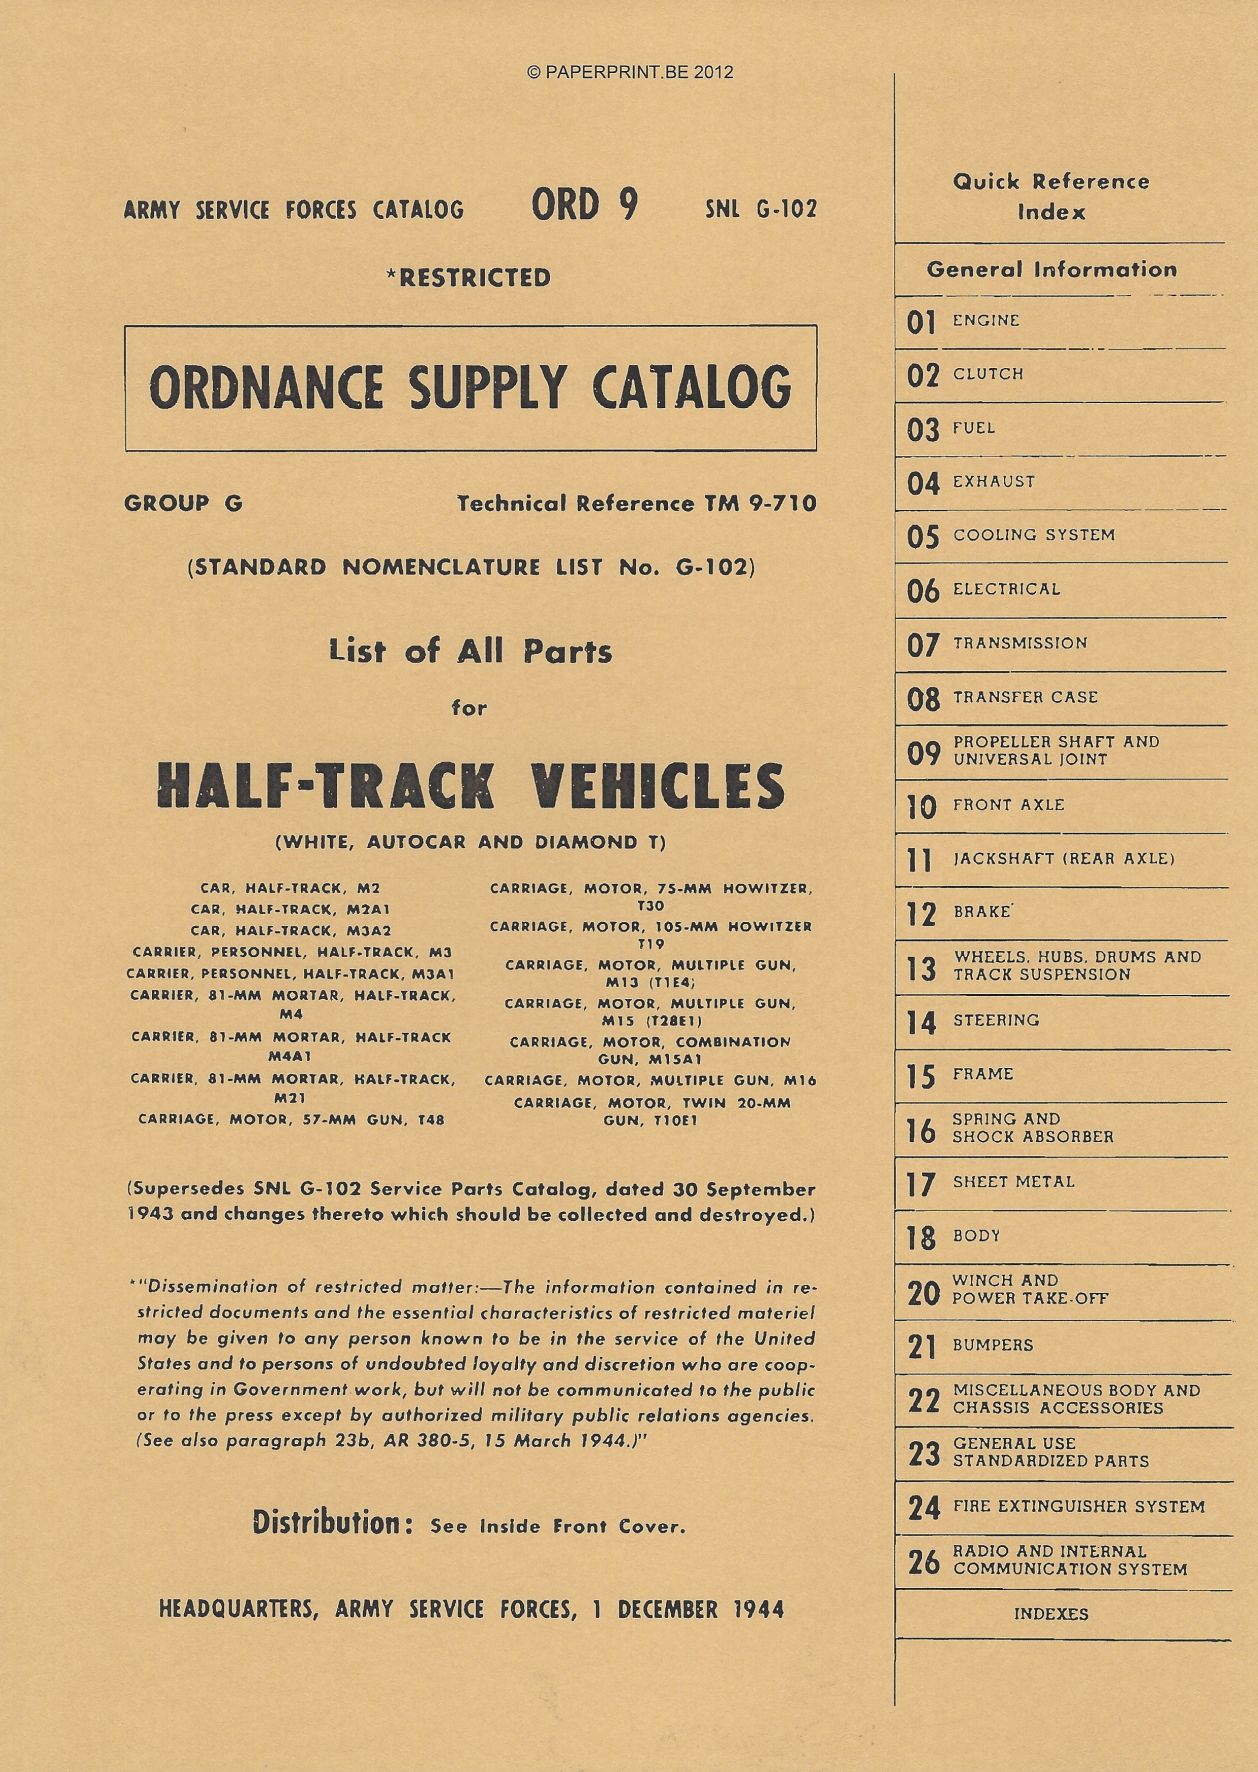 SNL G-102 US PARTS LIST FOR HALF-TRACK VEHICLES (WHITE, AUTOCAR AND DIAMOND T)